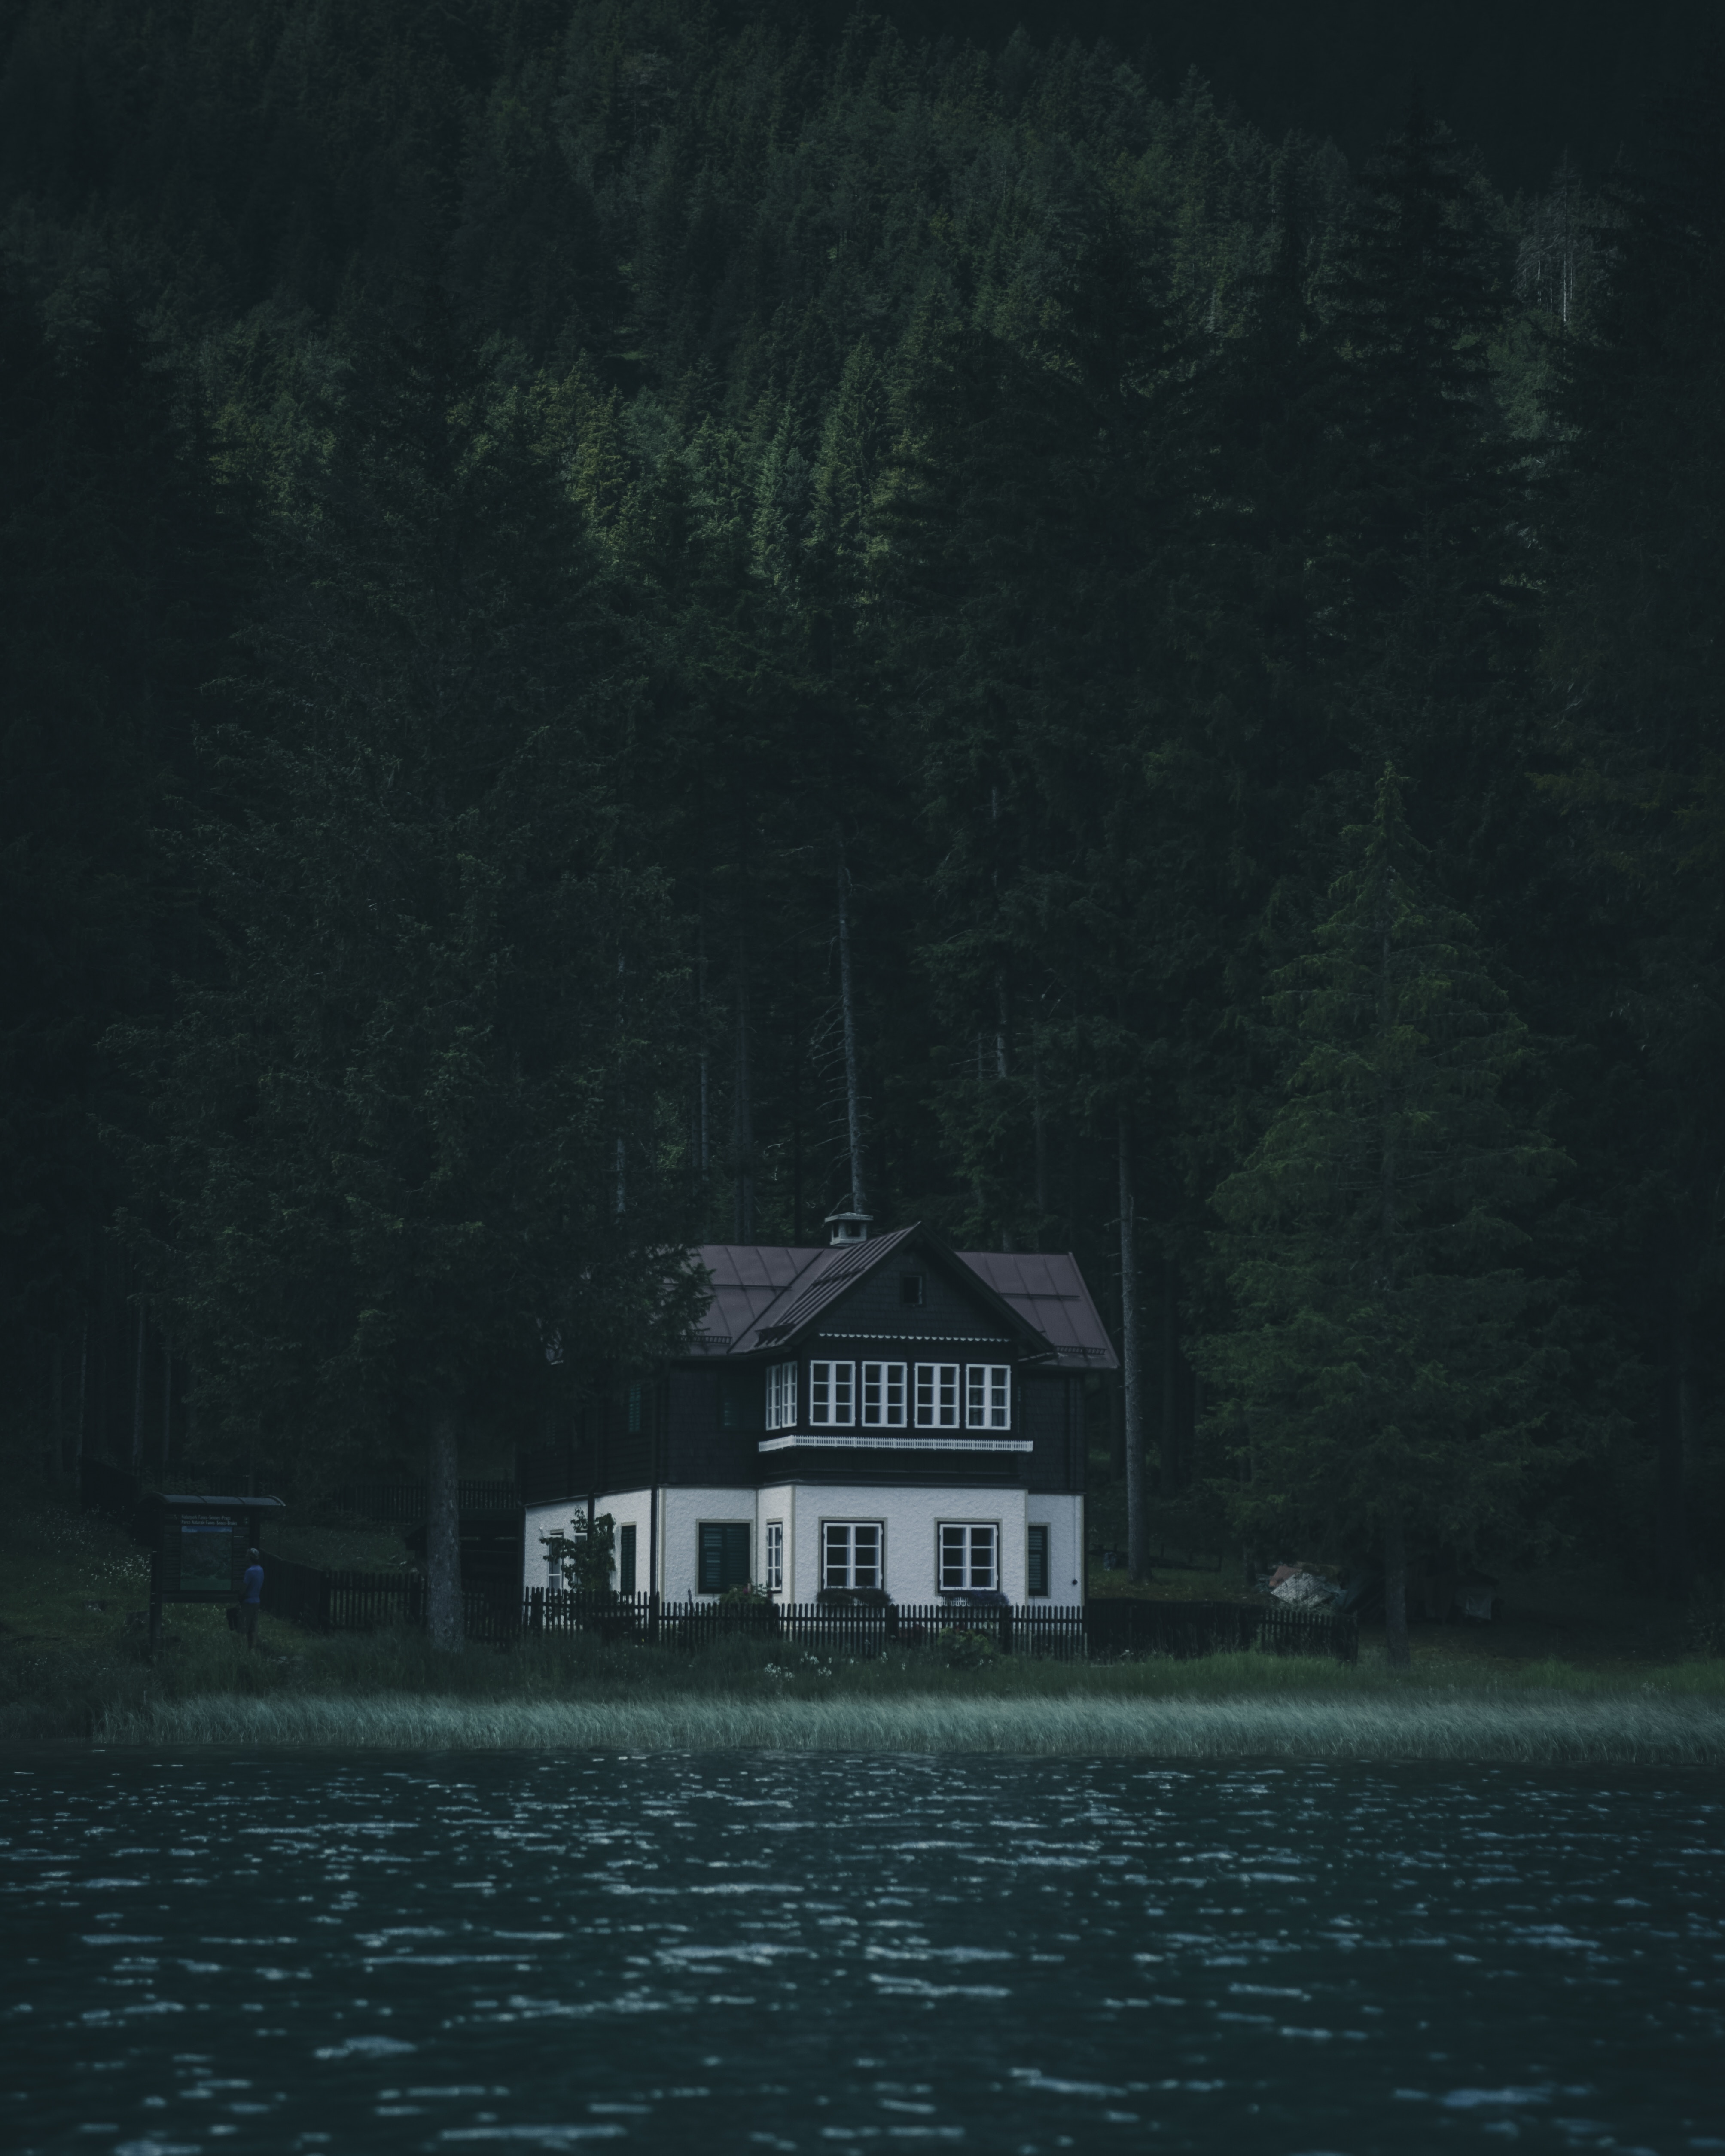 small house, nature, rivers, trees, privacy, seclusion, forest, lodge, silence, gloomy